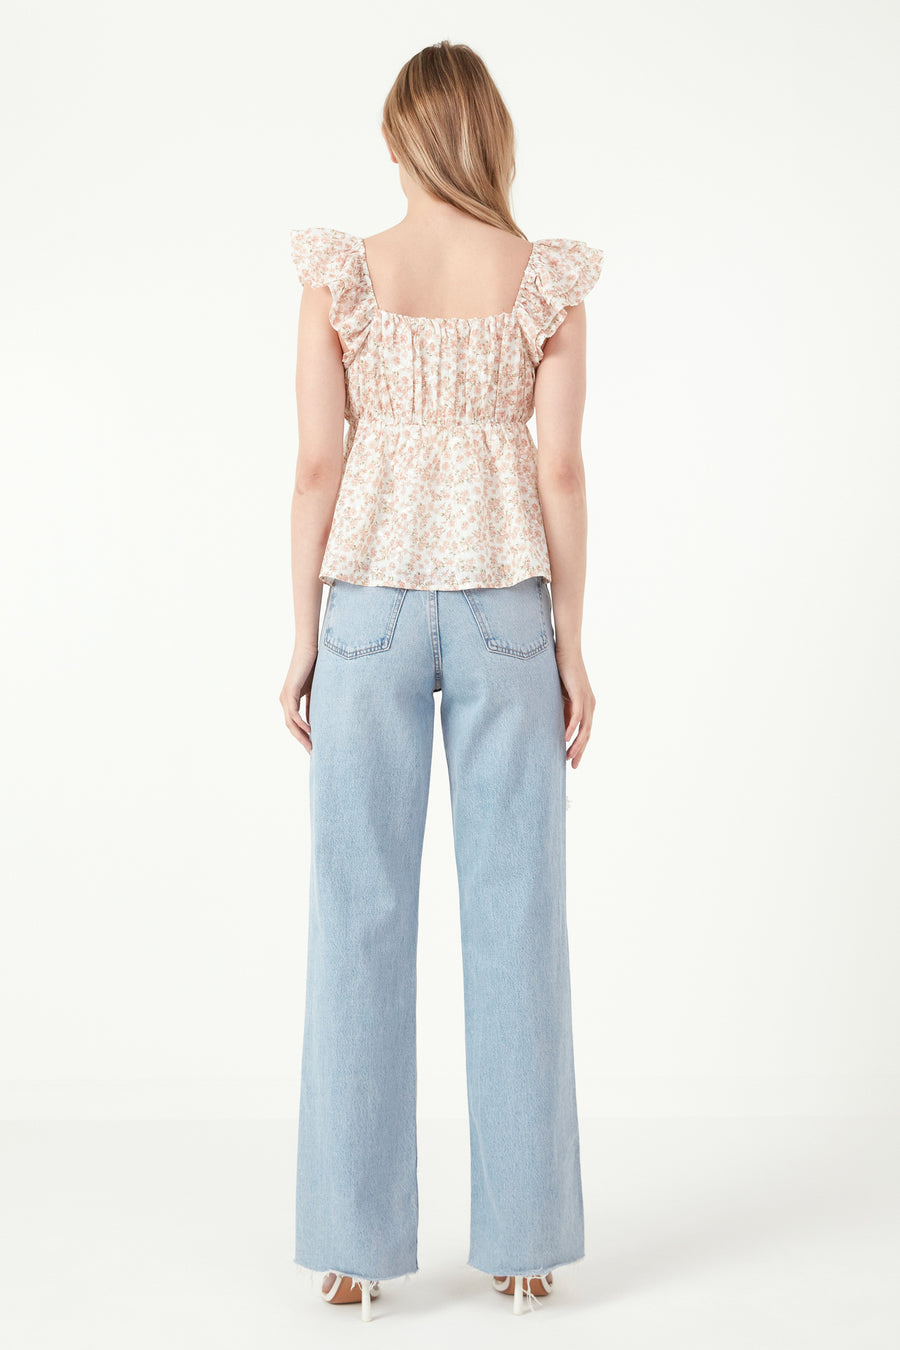 Floral Top With Ruffle Detail